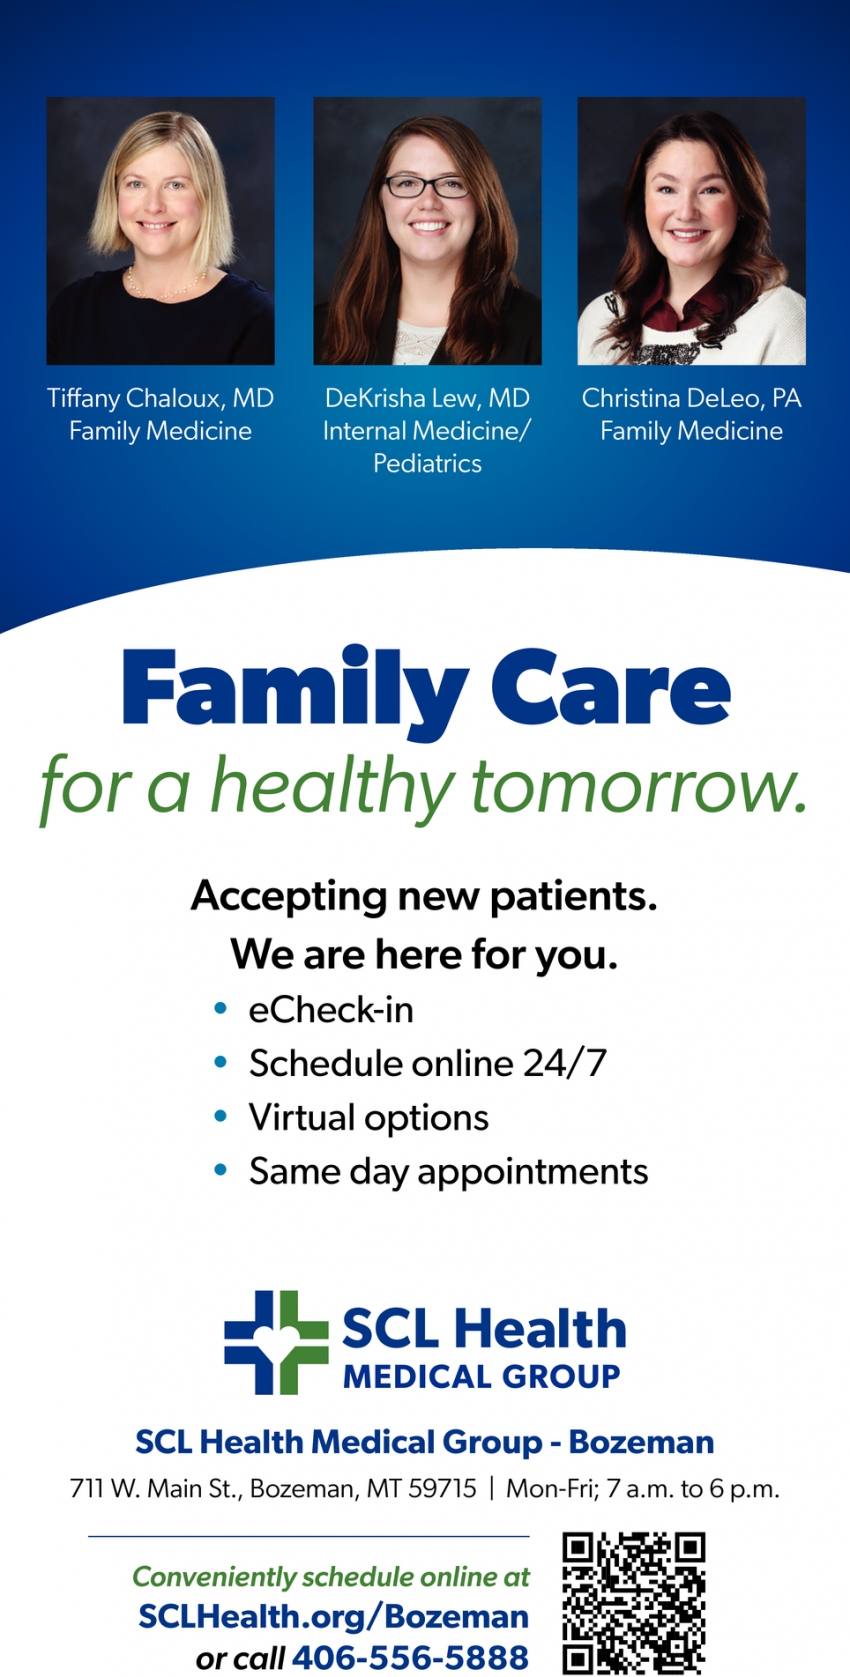 Family Care